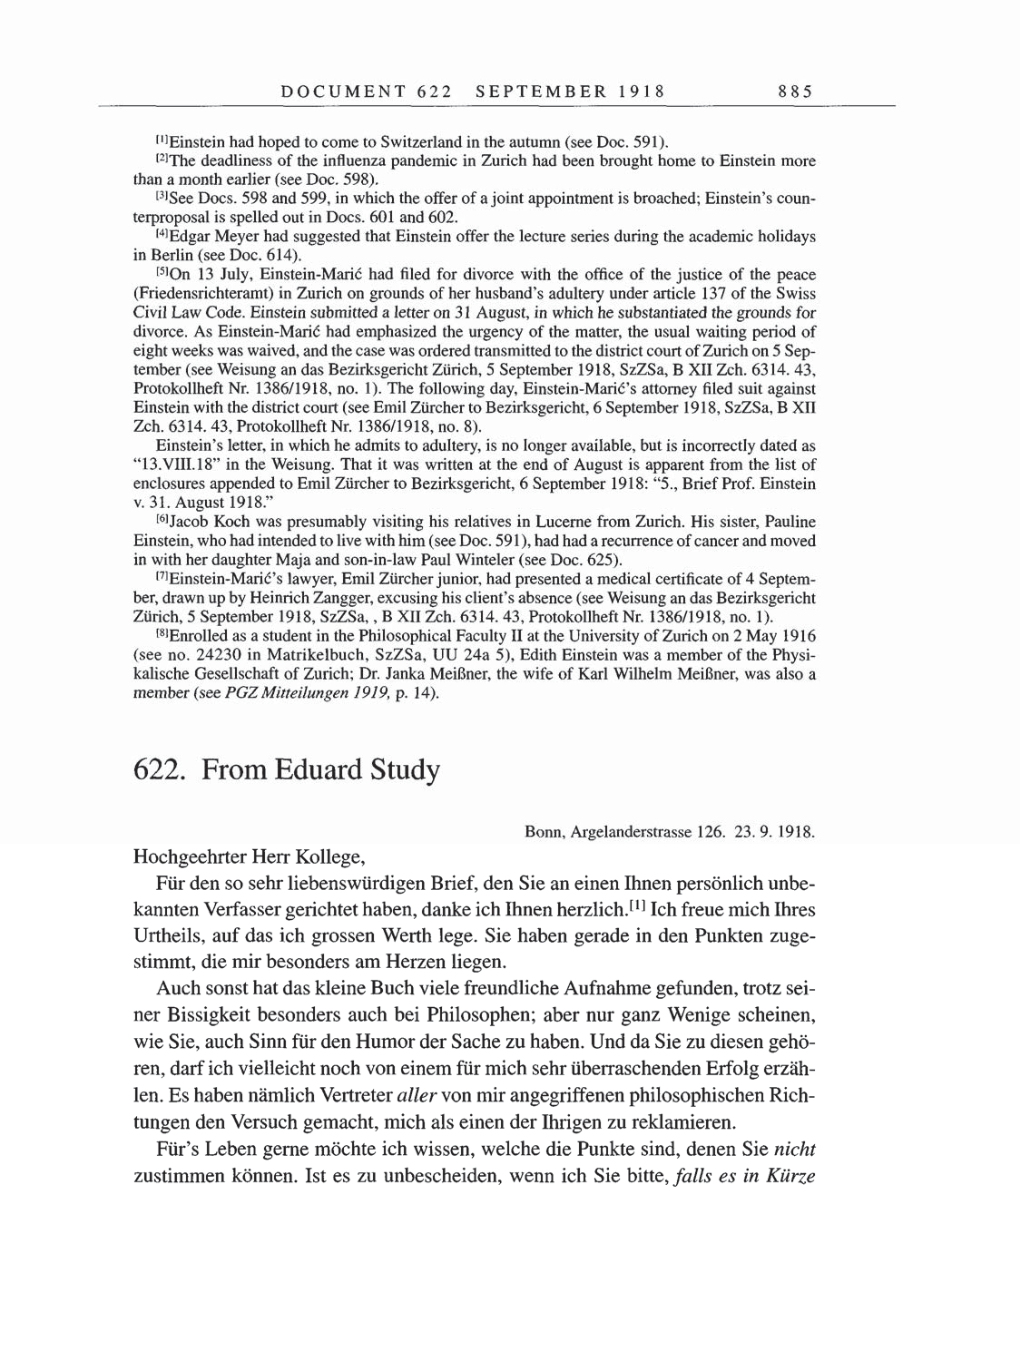 Volume 8, Part B: The Berlin Years: Correspondence 1918 page 885